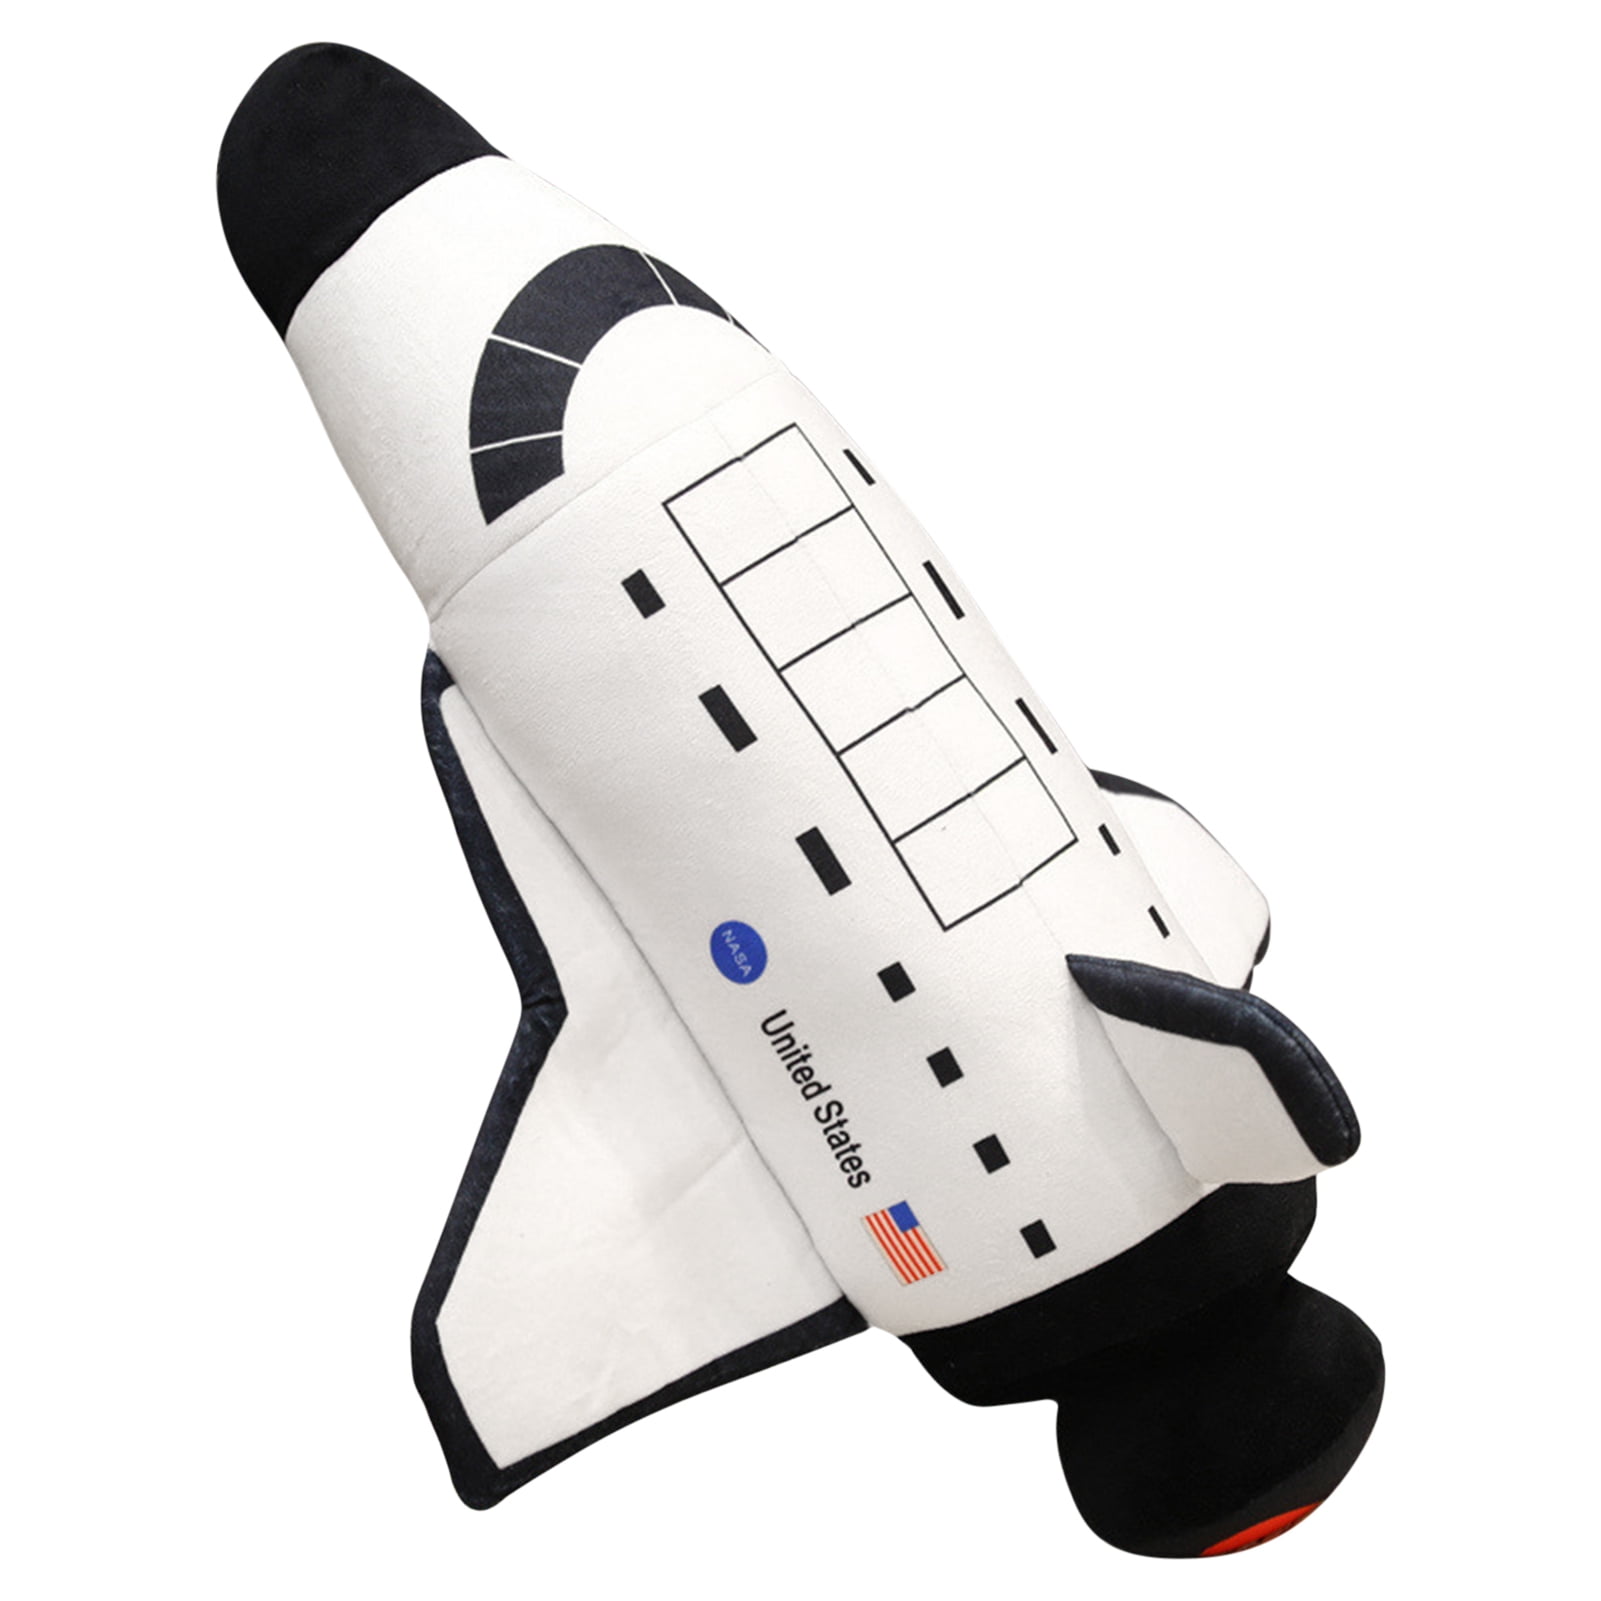 Simulation Model Space Shuttle Rocket Toys Plush Doll Pillow Cushion Kids Gifts 